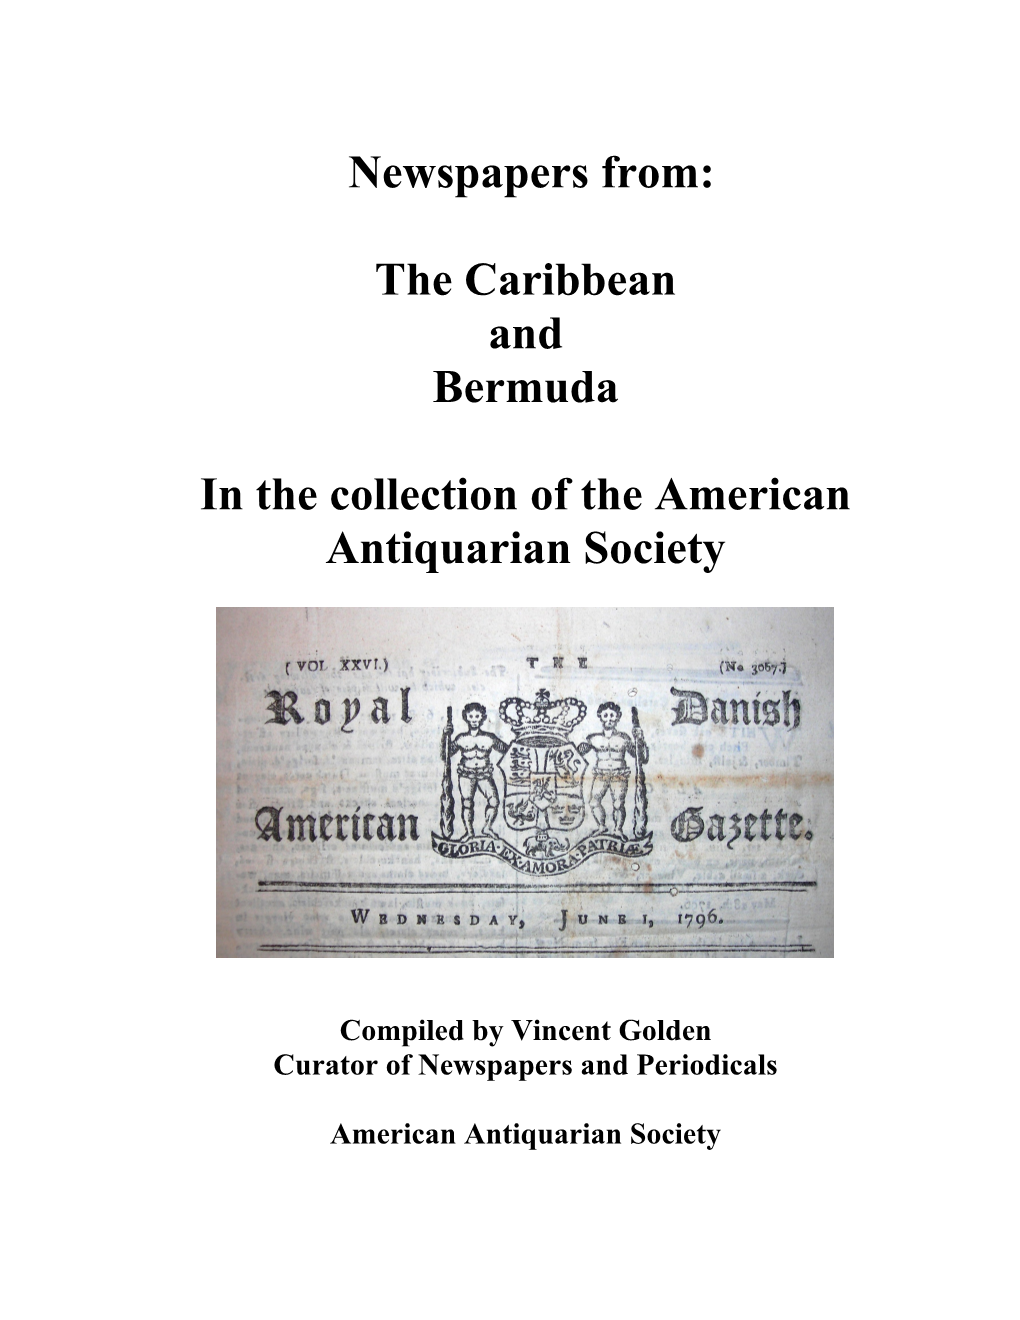 In the Collection of the American Antiquarian Society